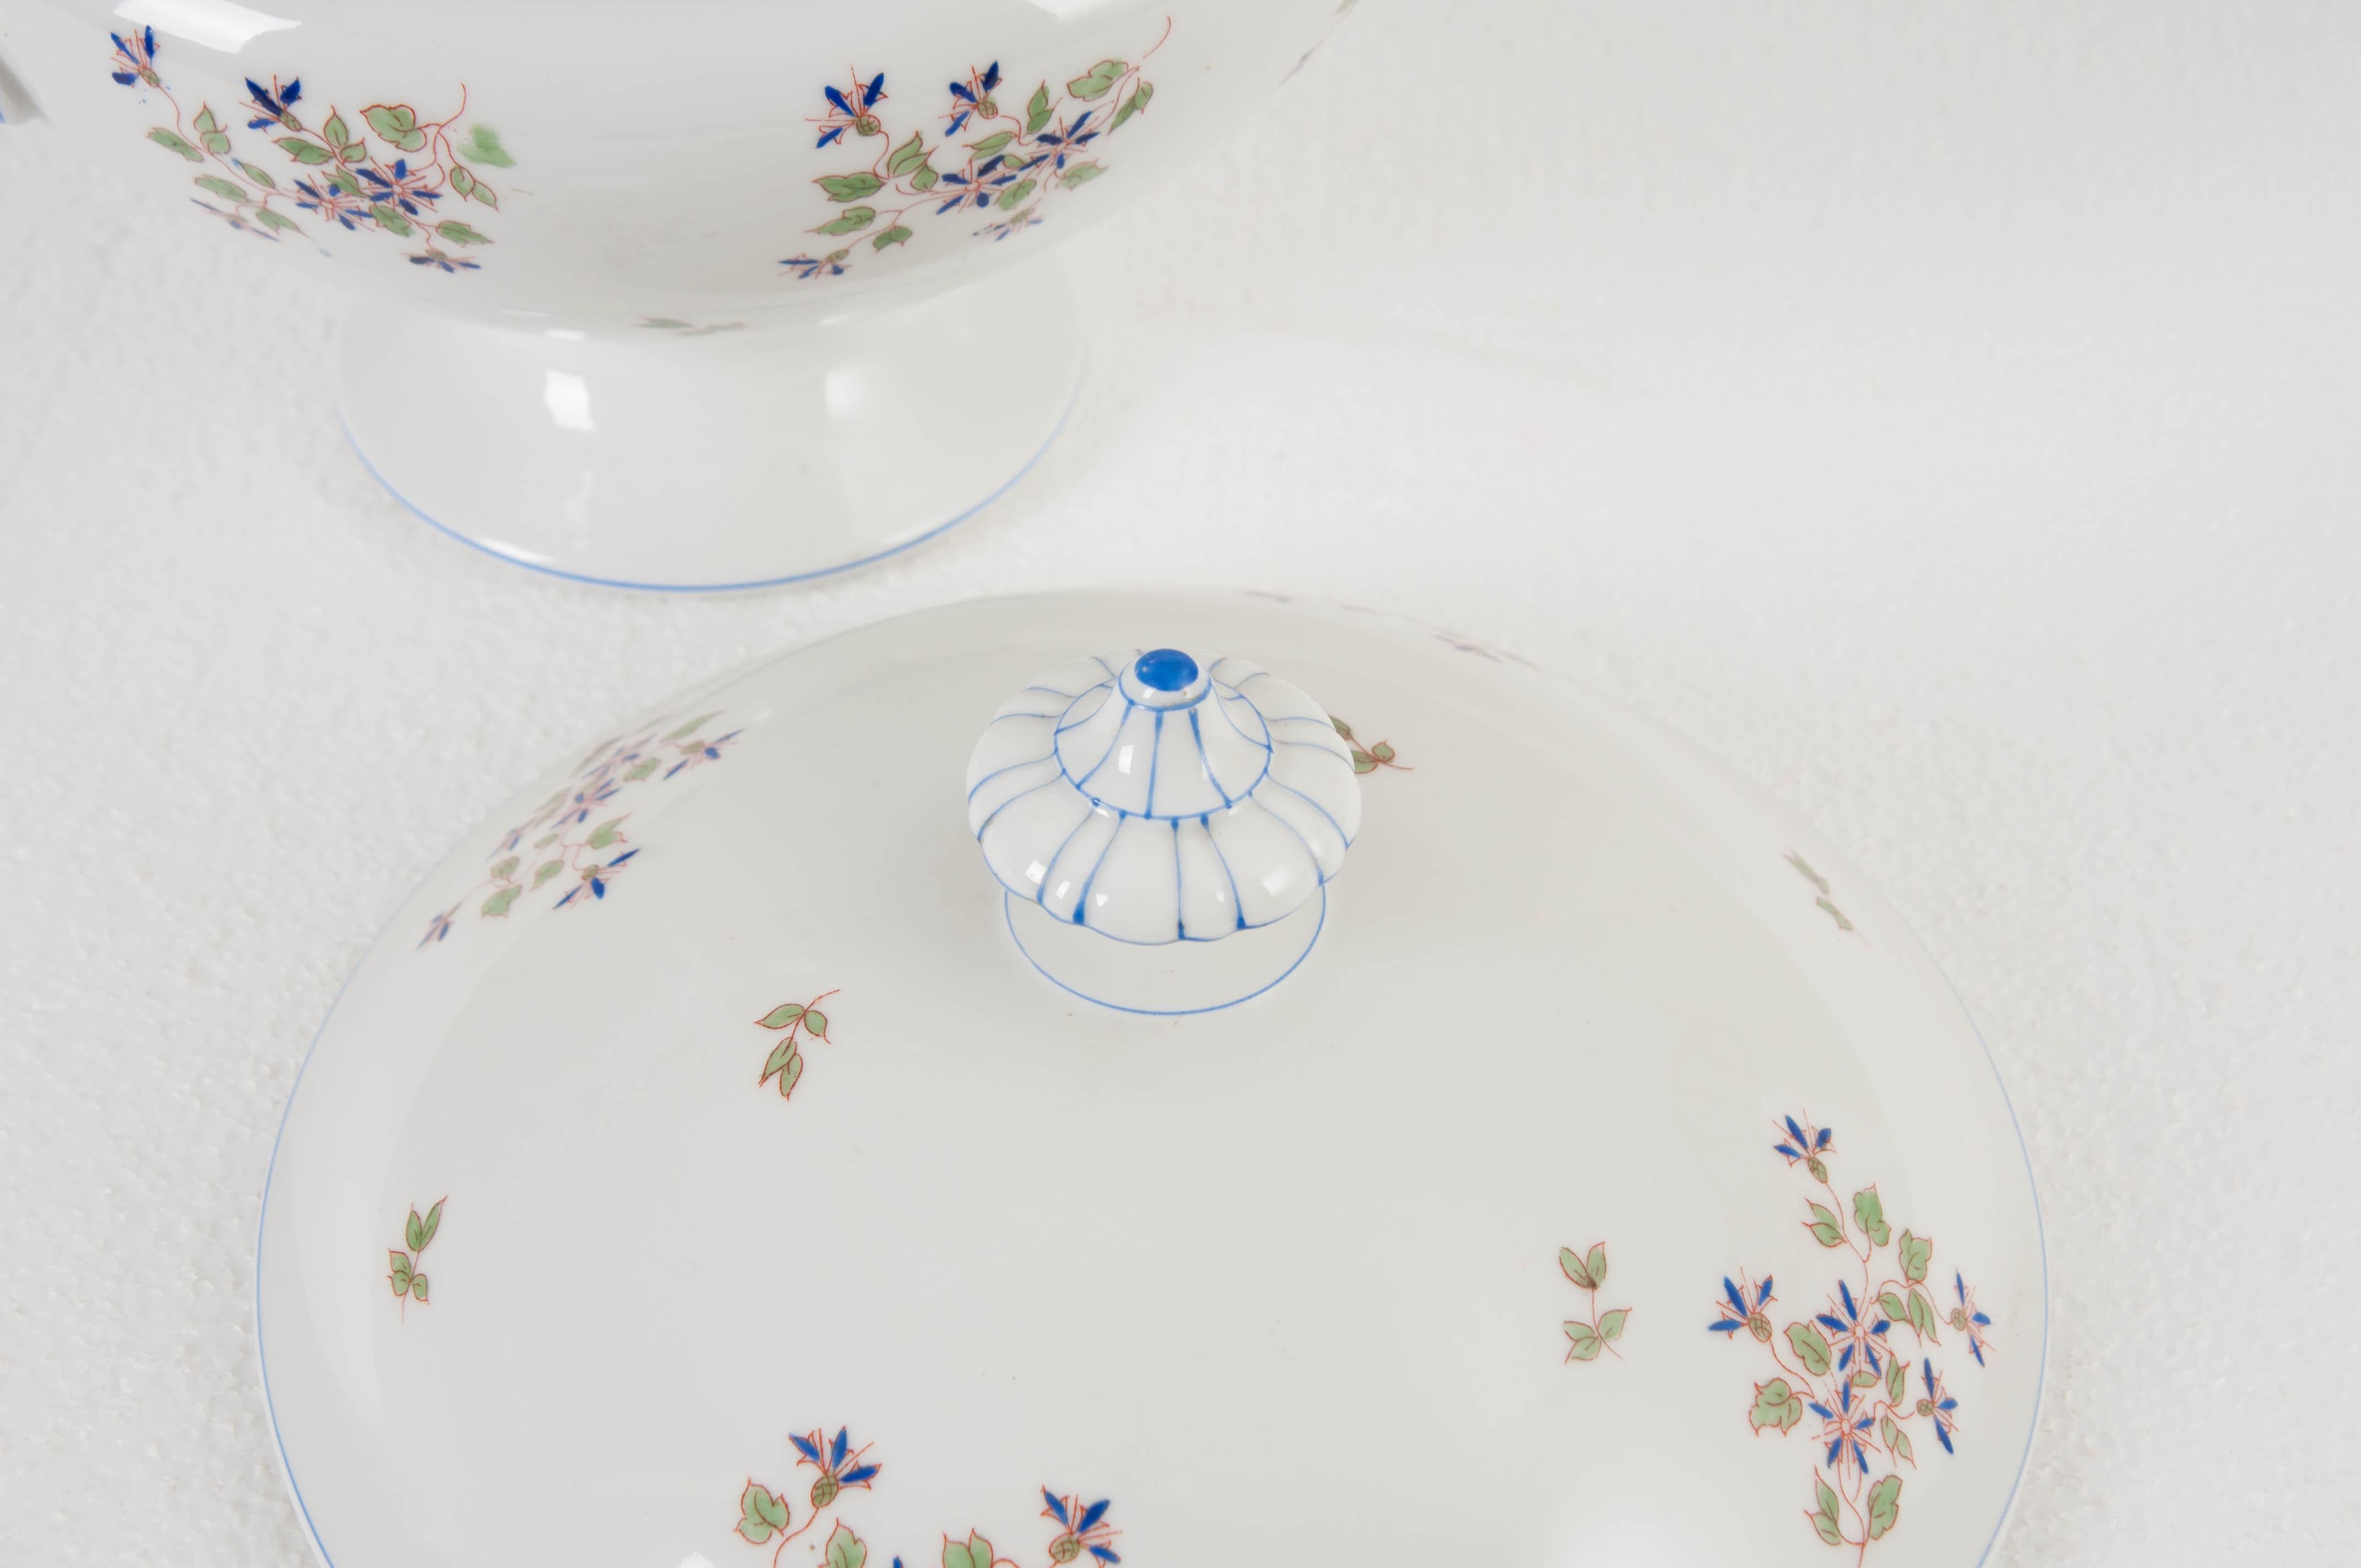 A sweet old Paris tureen dating to the early 1900s. The soup vessel has a beautiful cornflower pattern and is in wonderful antique condition, with no chips or damage. The footed vessel is ideal for serving soups, gumbos and stews in a beautiful